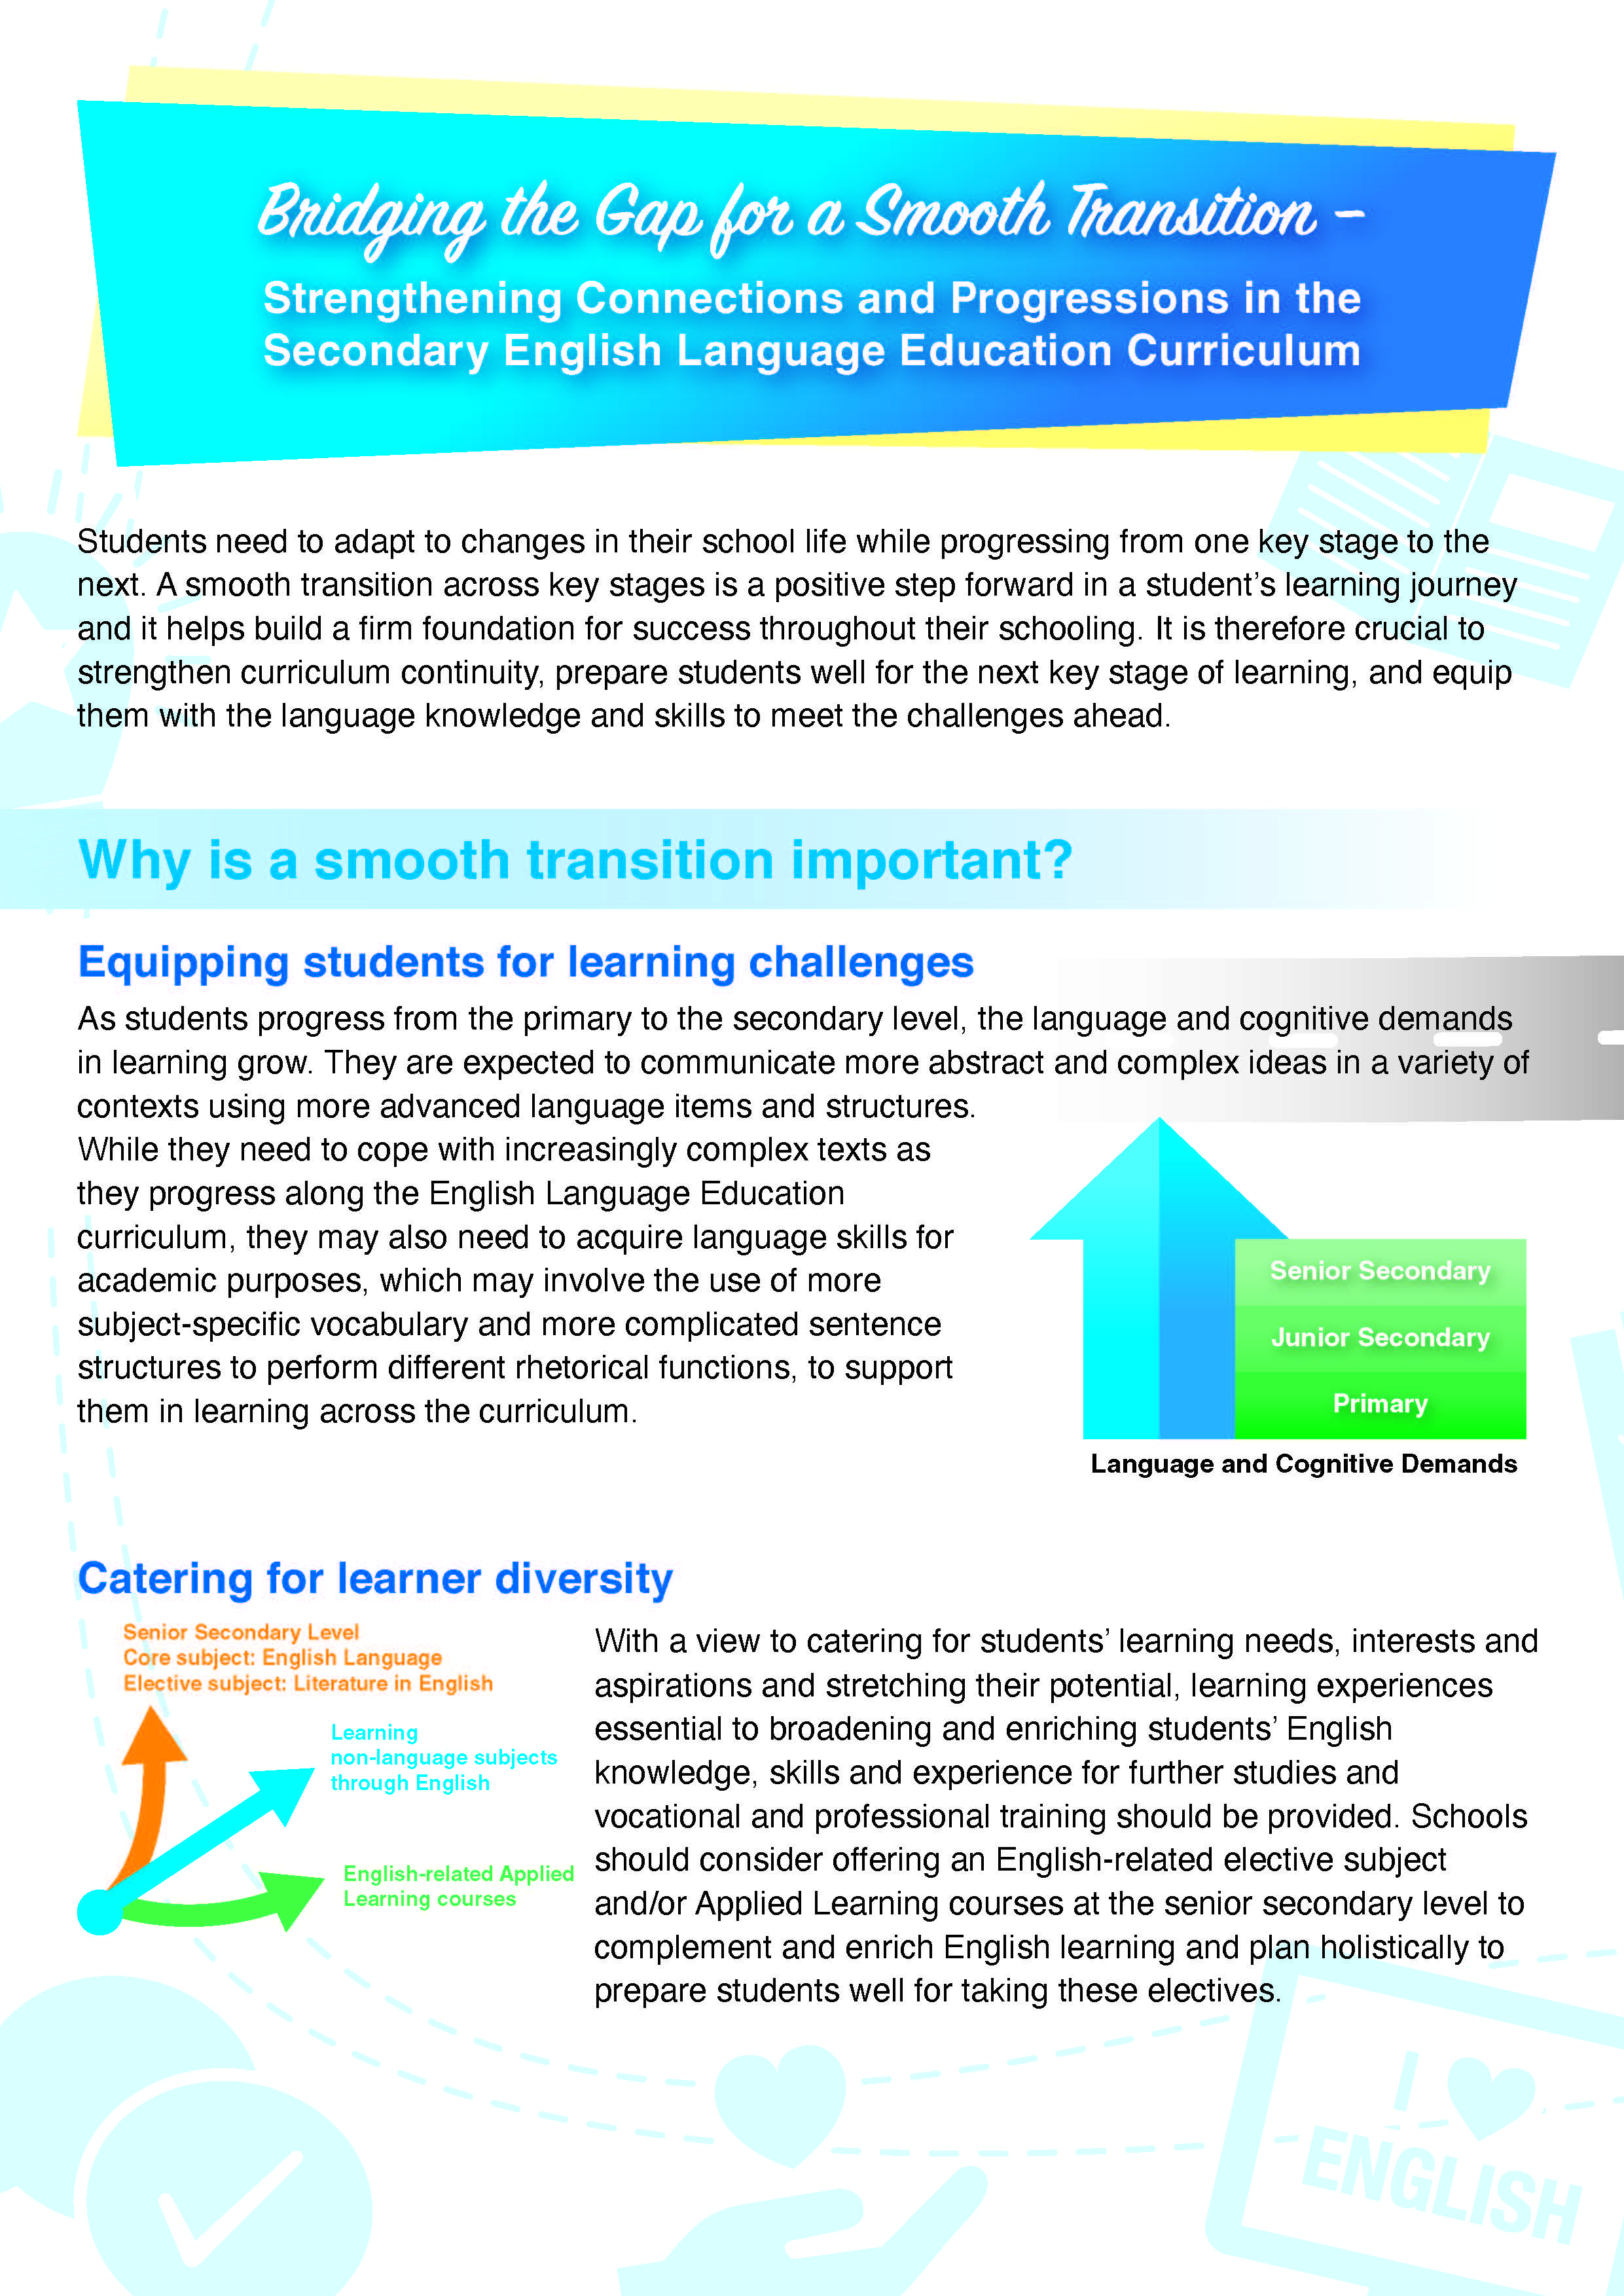  Leaflet on “Bridging the Gap for a Smooth Transition – Strengthening Connections and Progressions in the Secondary English Language Education Curriculum”